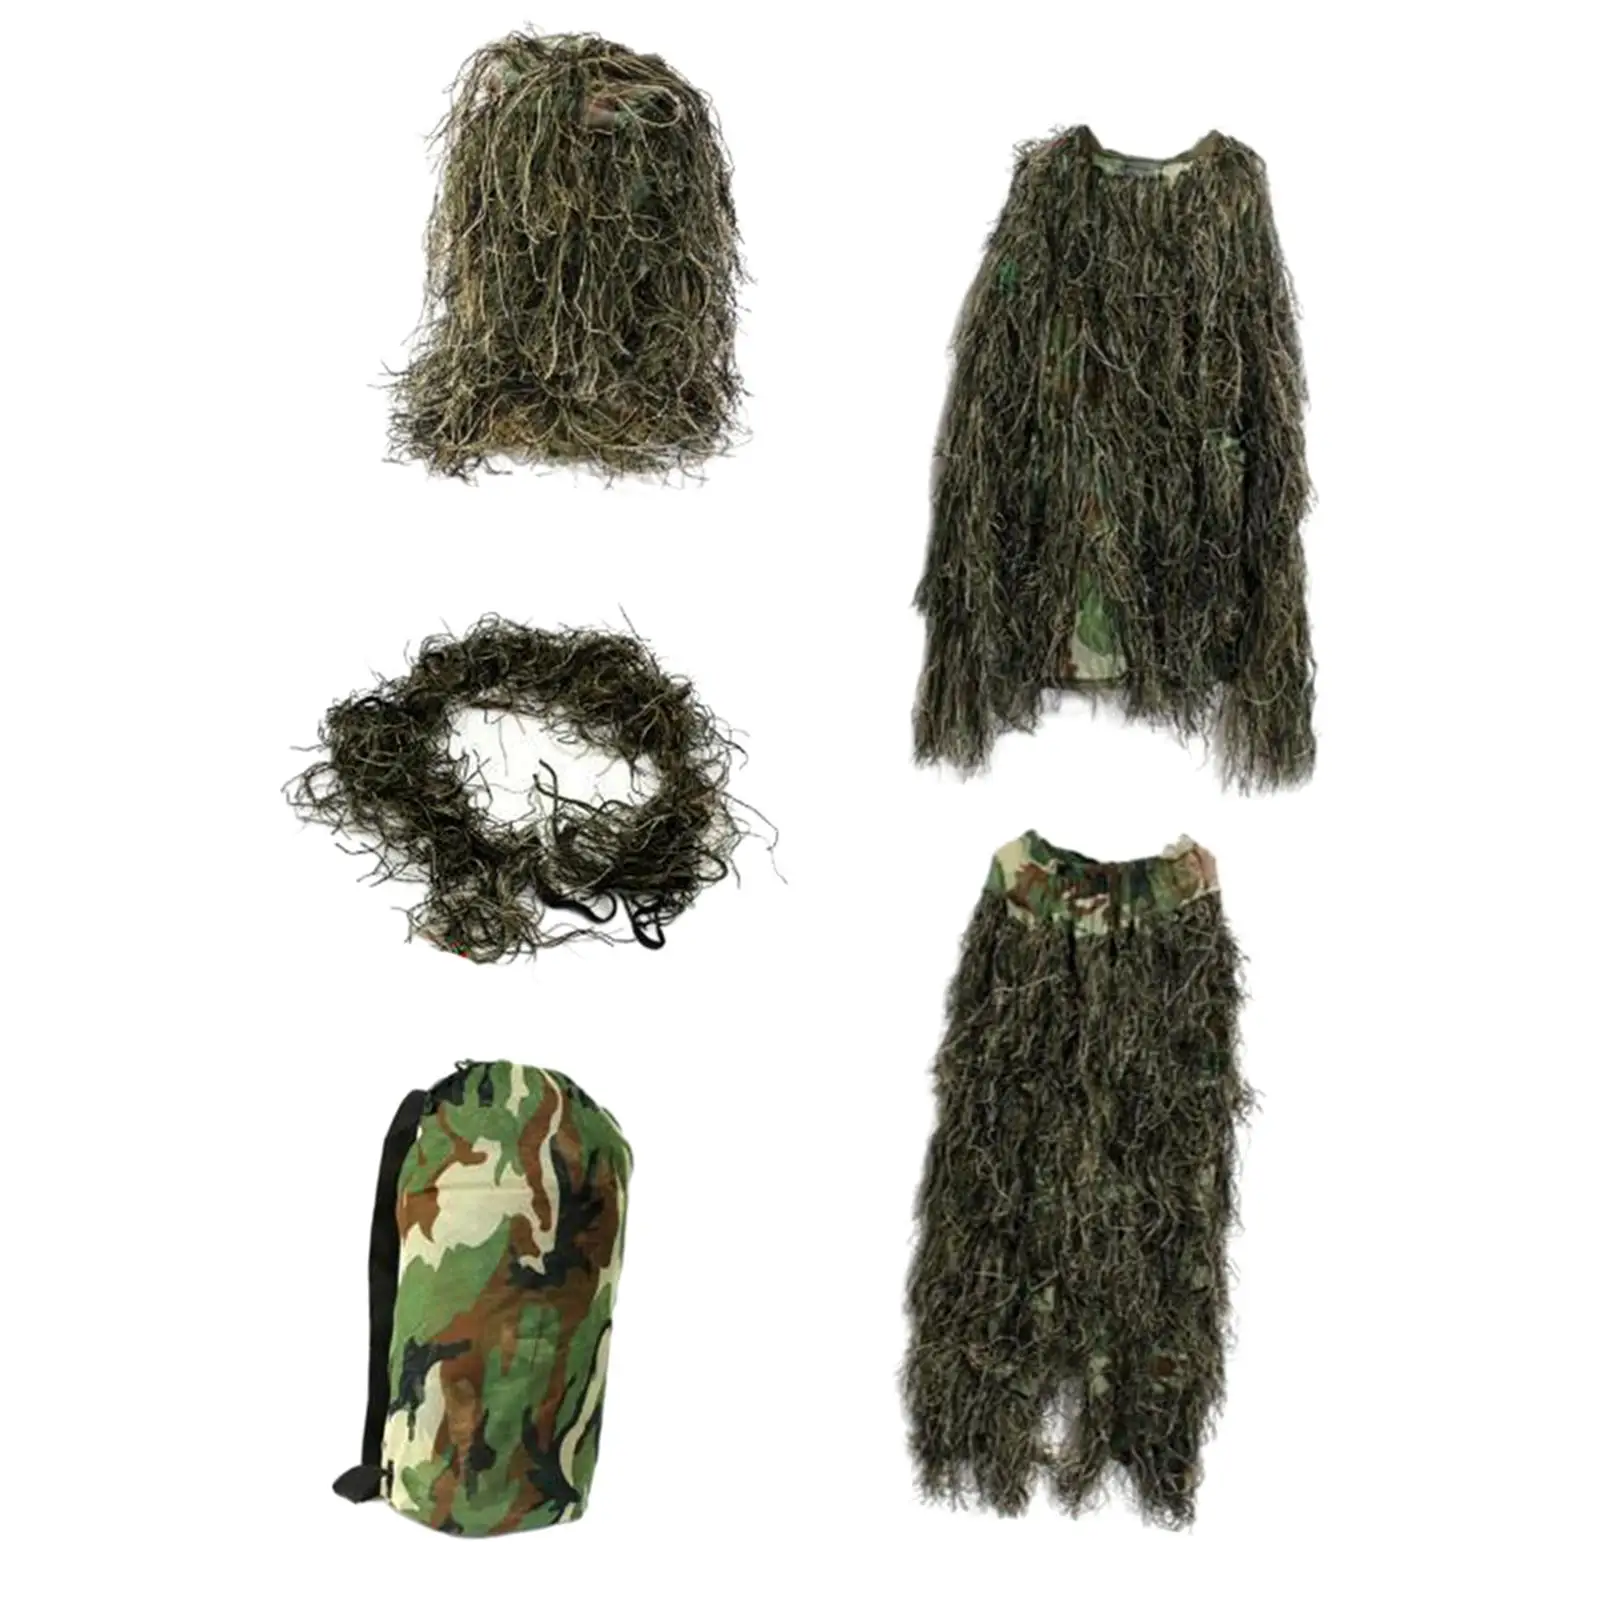 Kids Ghillie Suit Woodland Clothing for Game Birdwatching Photography